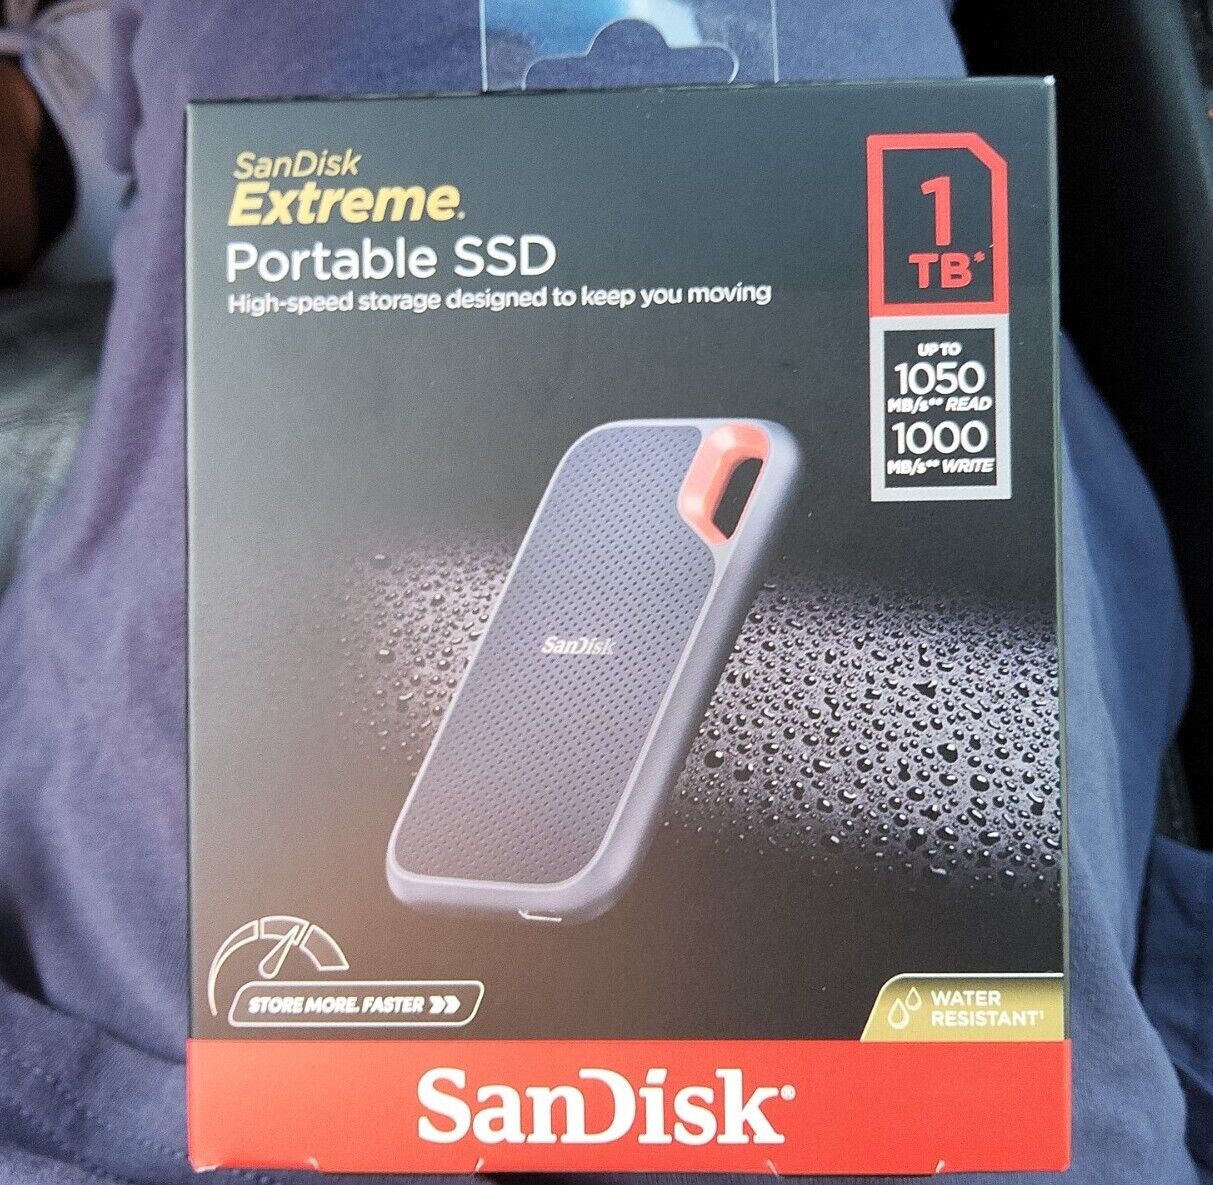 SanDisk 1TB Extreme Portable External SSD - Up to 1050 MB/s - USB-C, USB 3.1